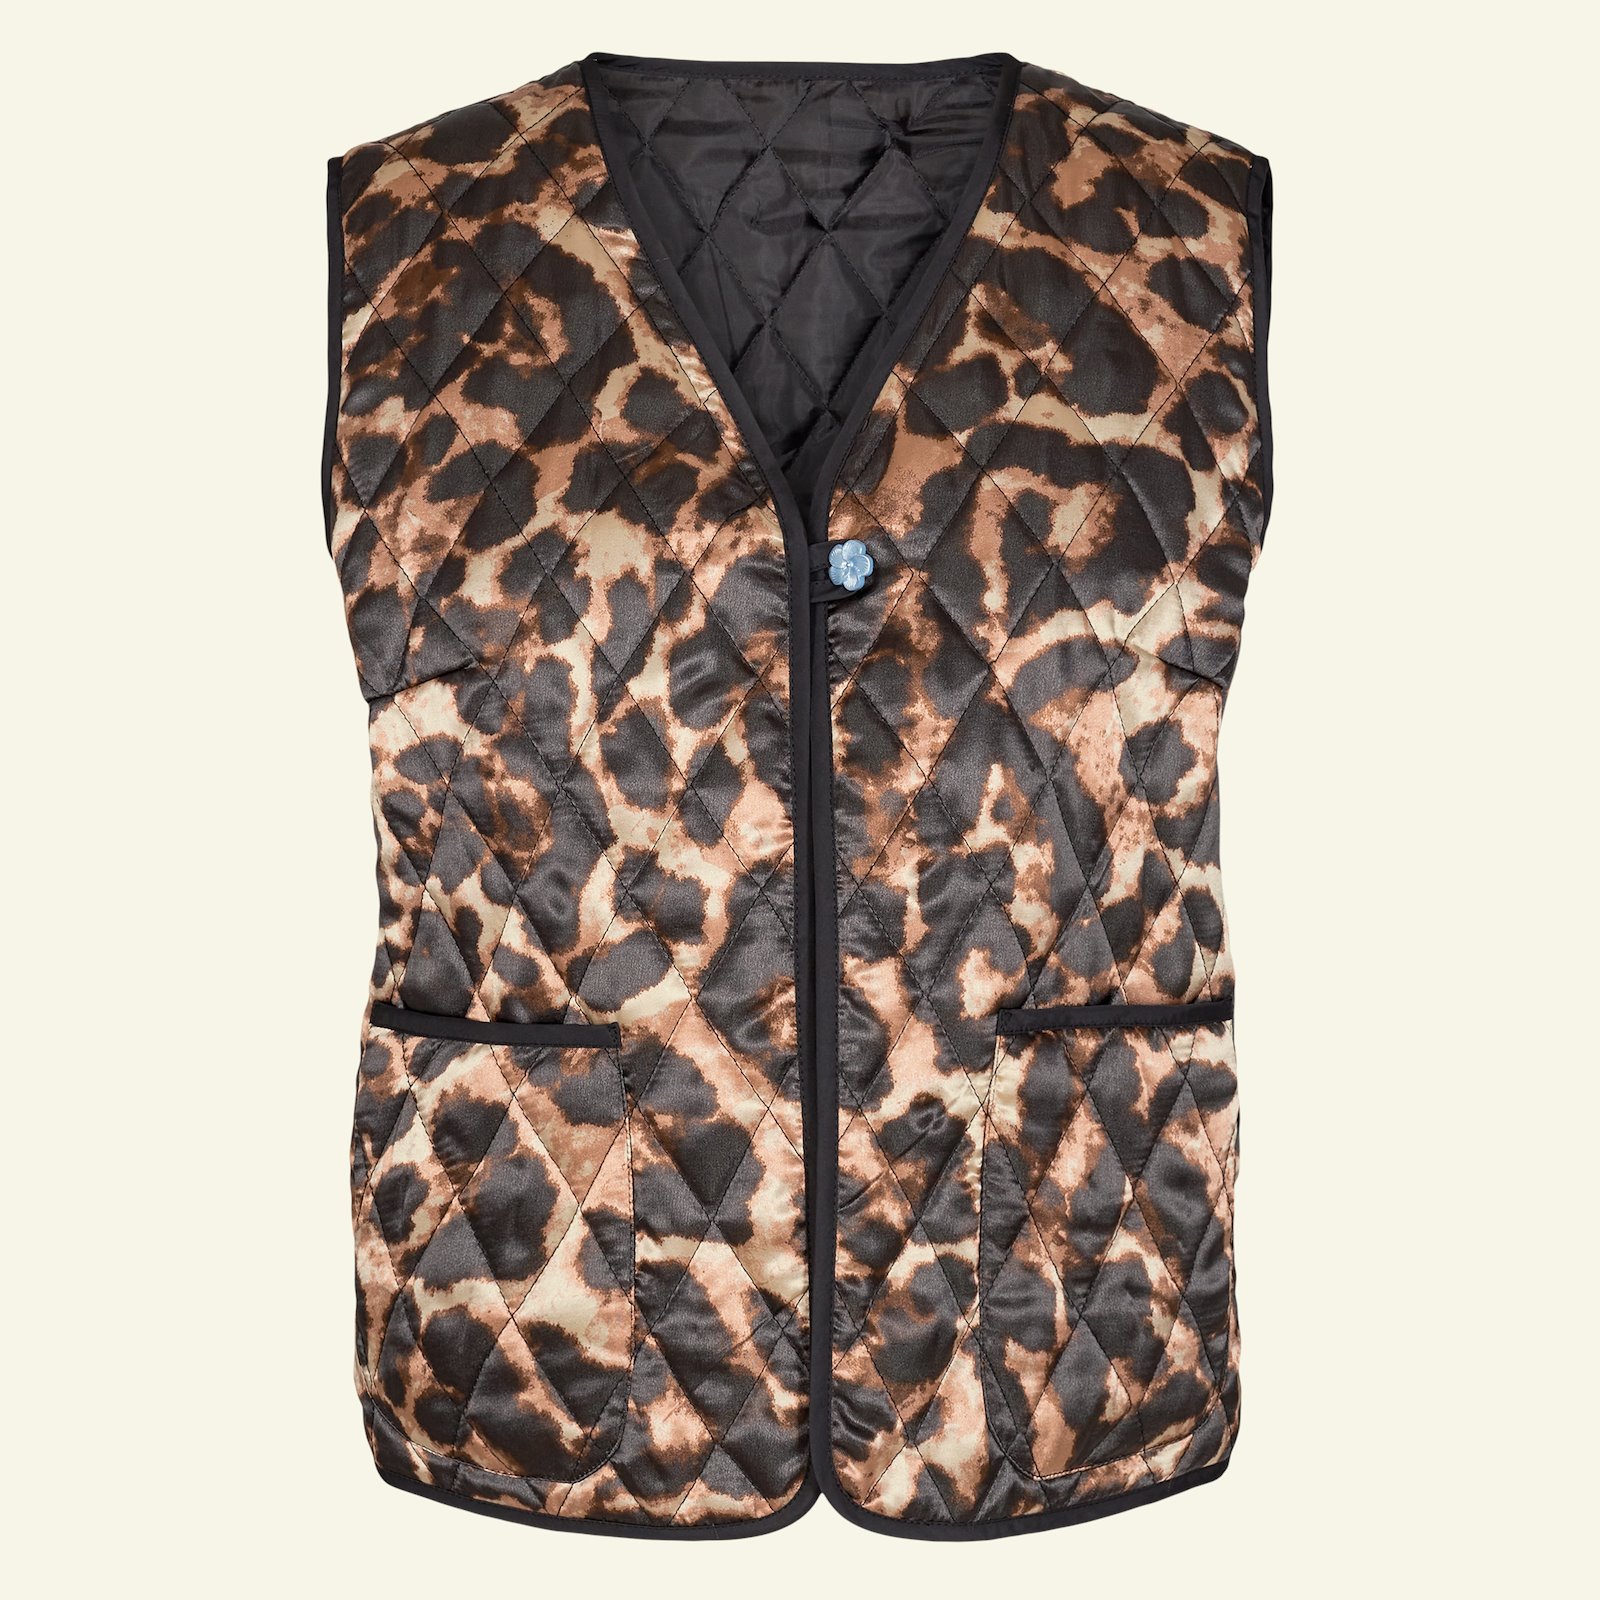 Quilted jacket and waistcoat, 46/18 p24047_920226_64080_sskit